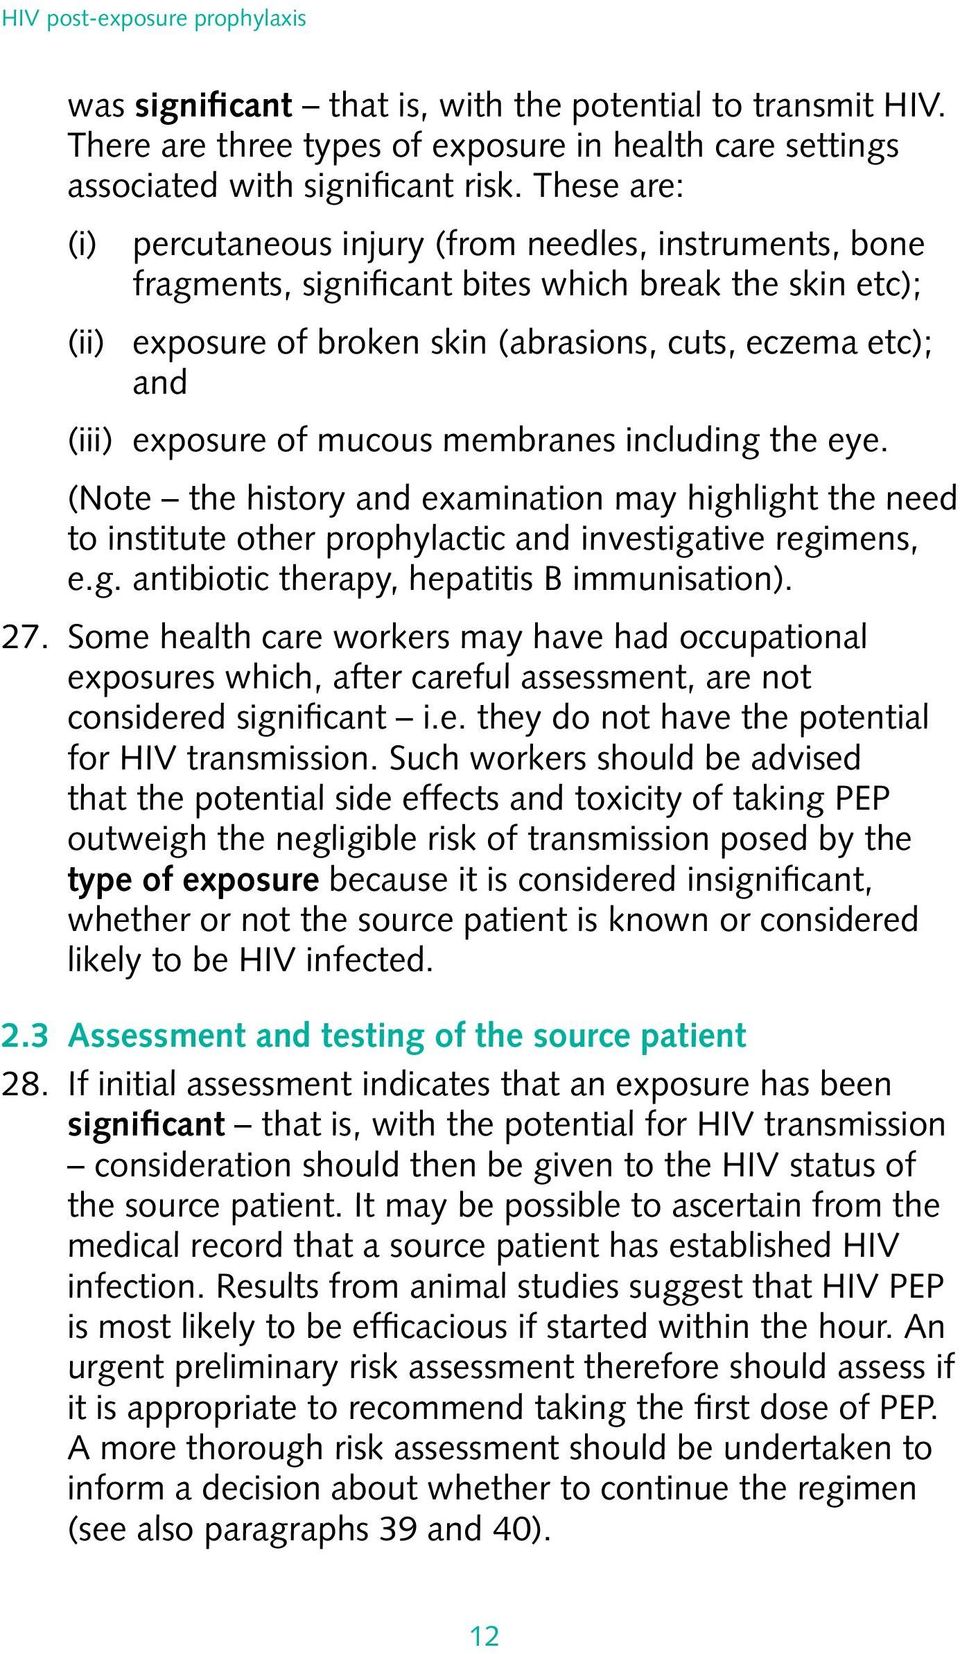 exposure of mucous membranes including the eye. (Note the history and examination may highlight the need to institute other prophylactic and investigative regimens, e.g. antibiotic therapy, hepatitis B immunisation).